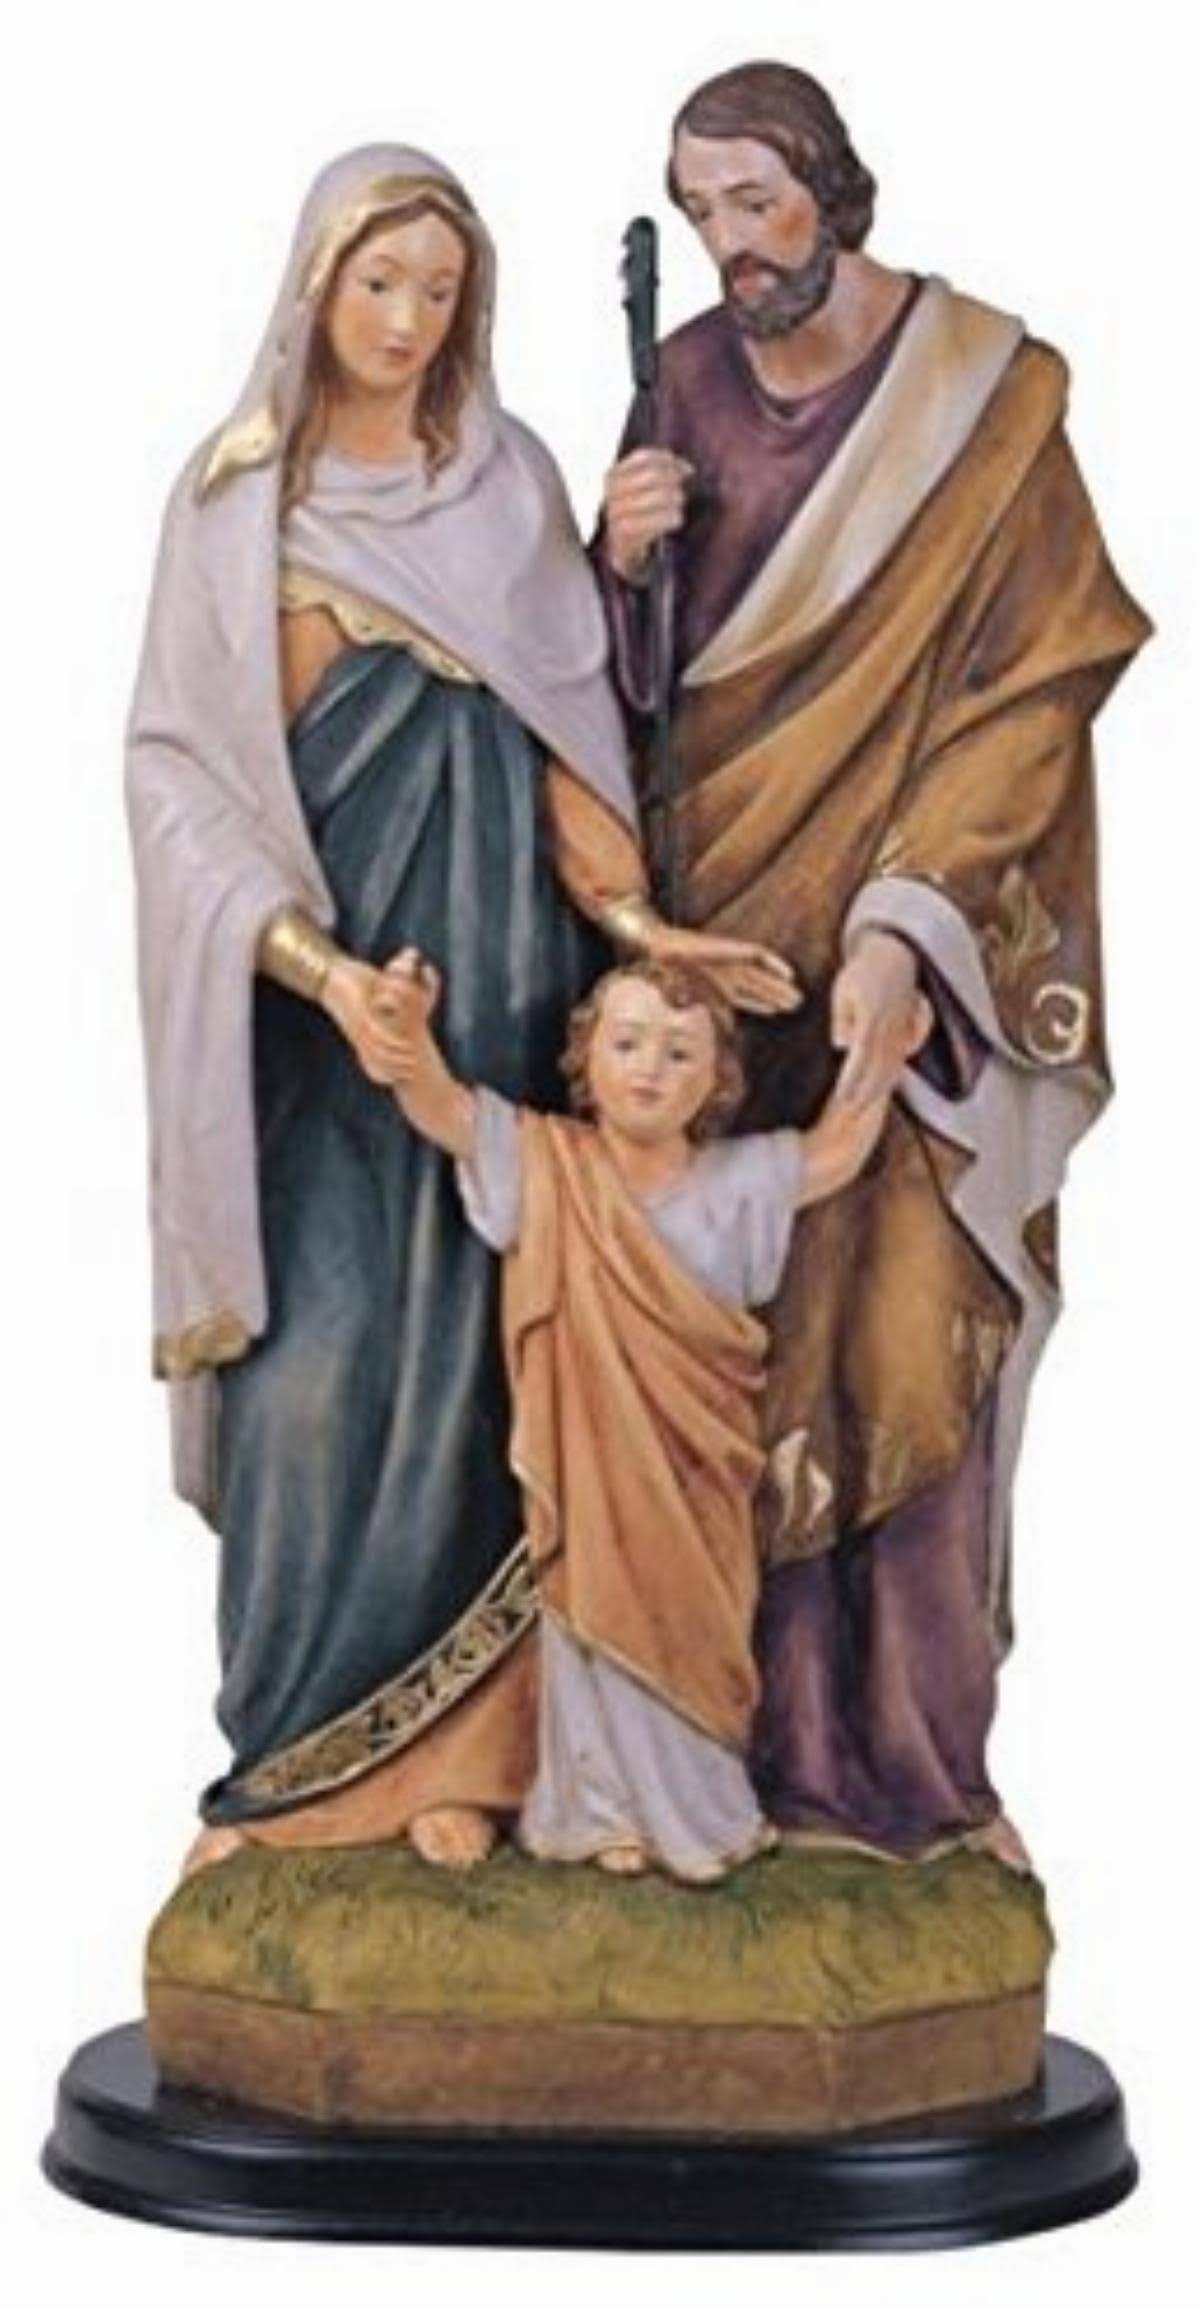 George S. Chen Imports SS-G-212.07 Holy Family Jesus Mary Joseph Religious Figurine Decoration, 12"